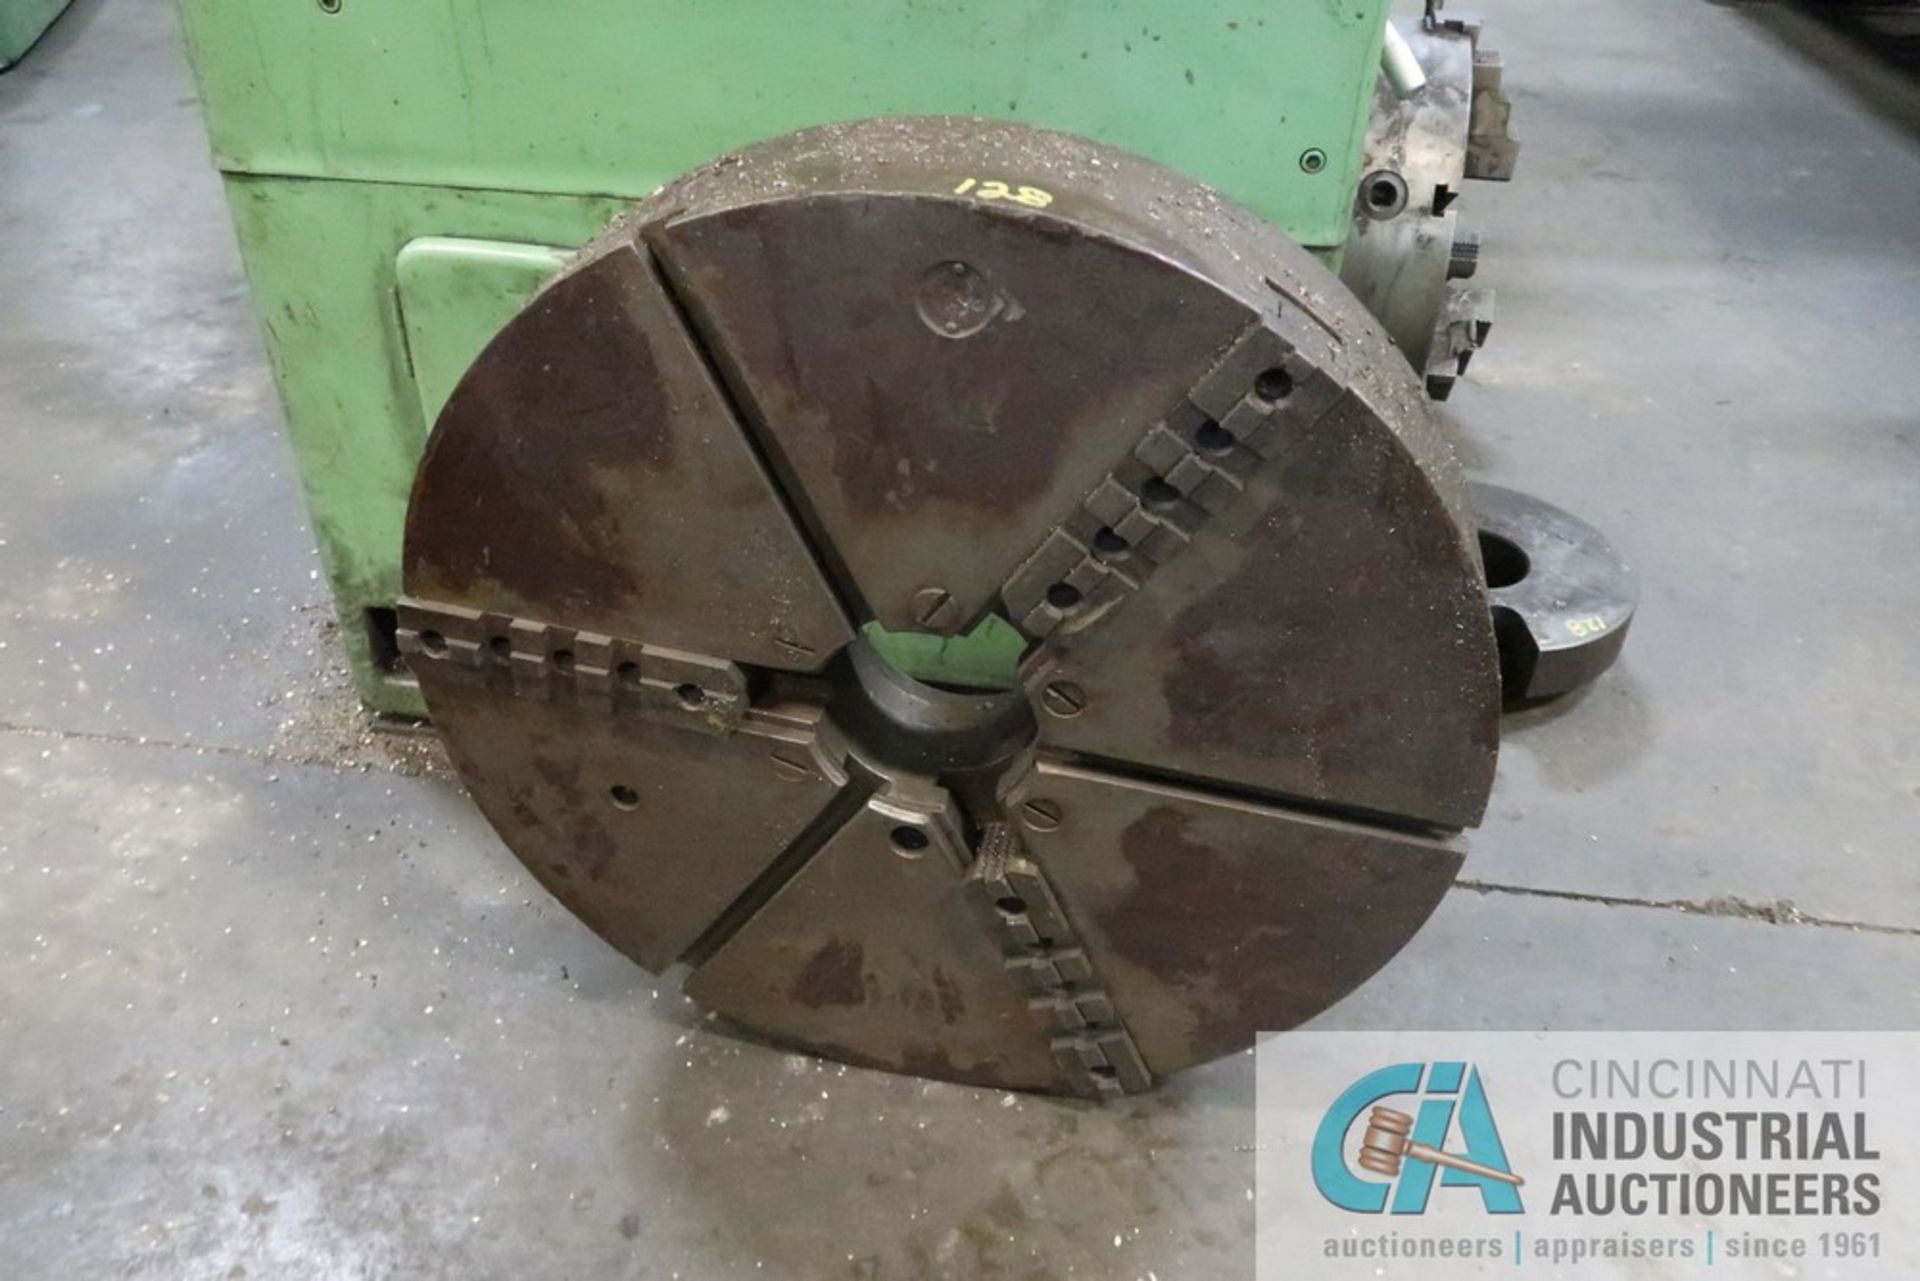 26" X 96" LEBLOND ENGINE LATHE; S/N 5H-555, 2" SPINDLE HOLE, 18" 4-JAW CHUCK, TAPER ATTACHMENT, - Image 12 of 15